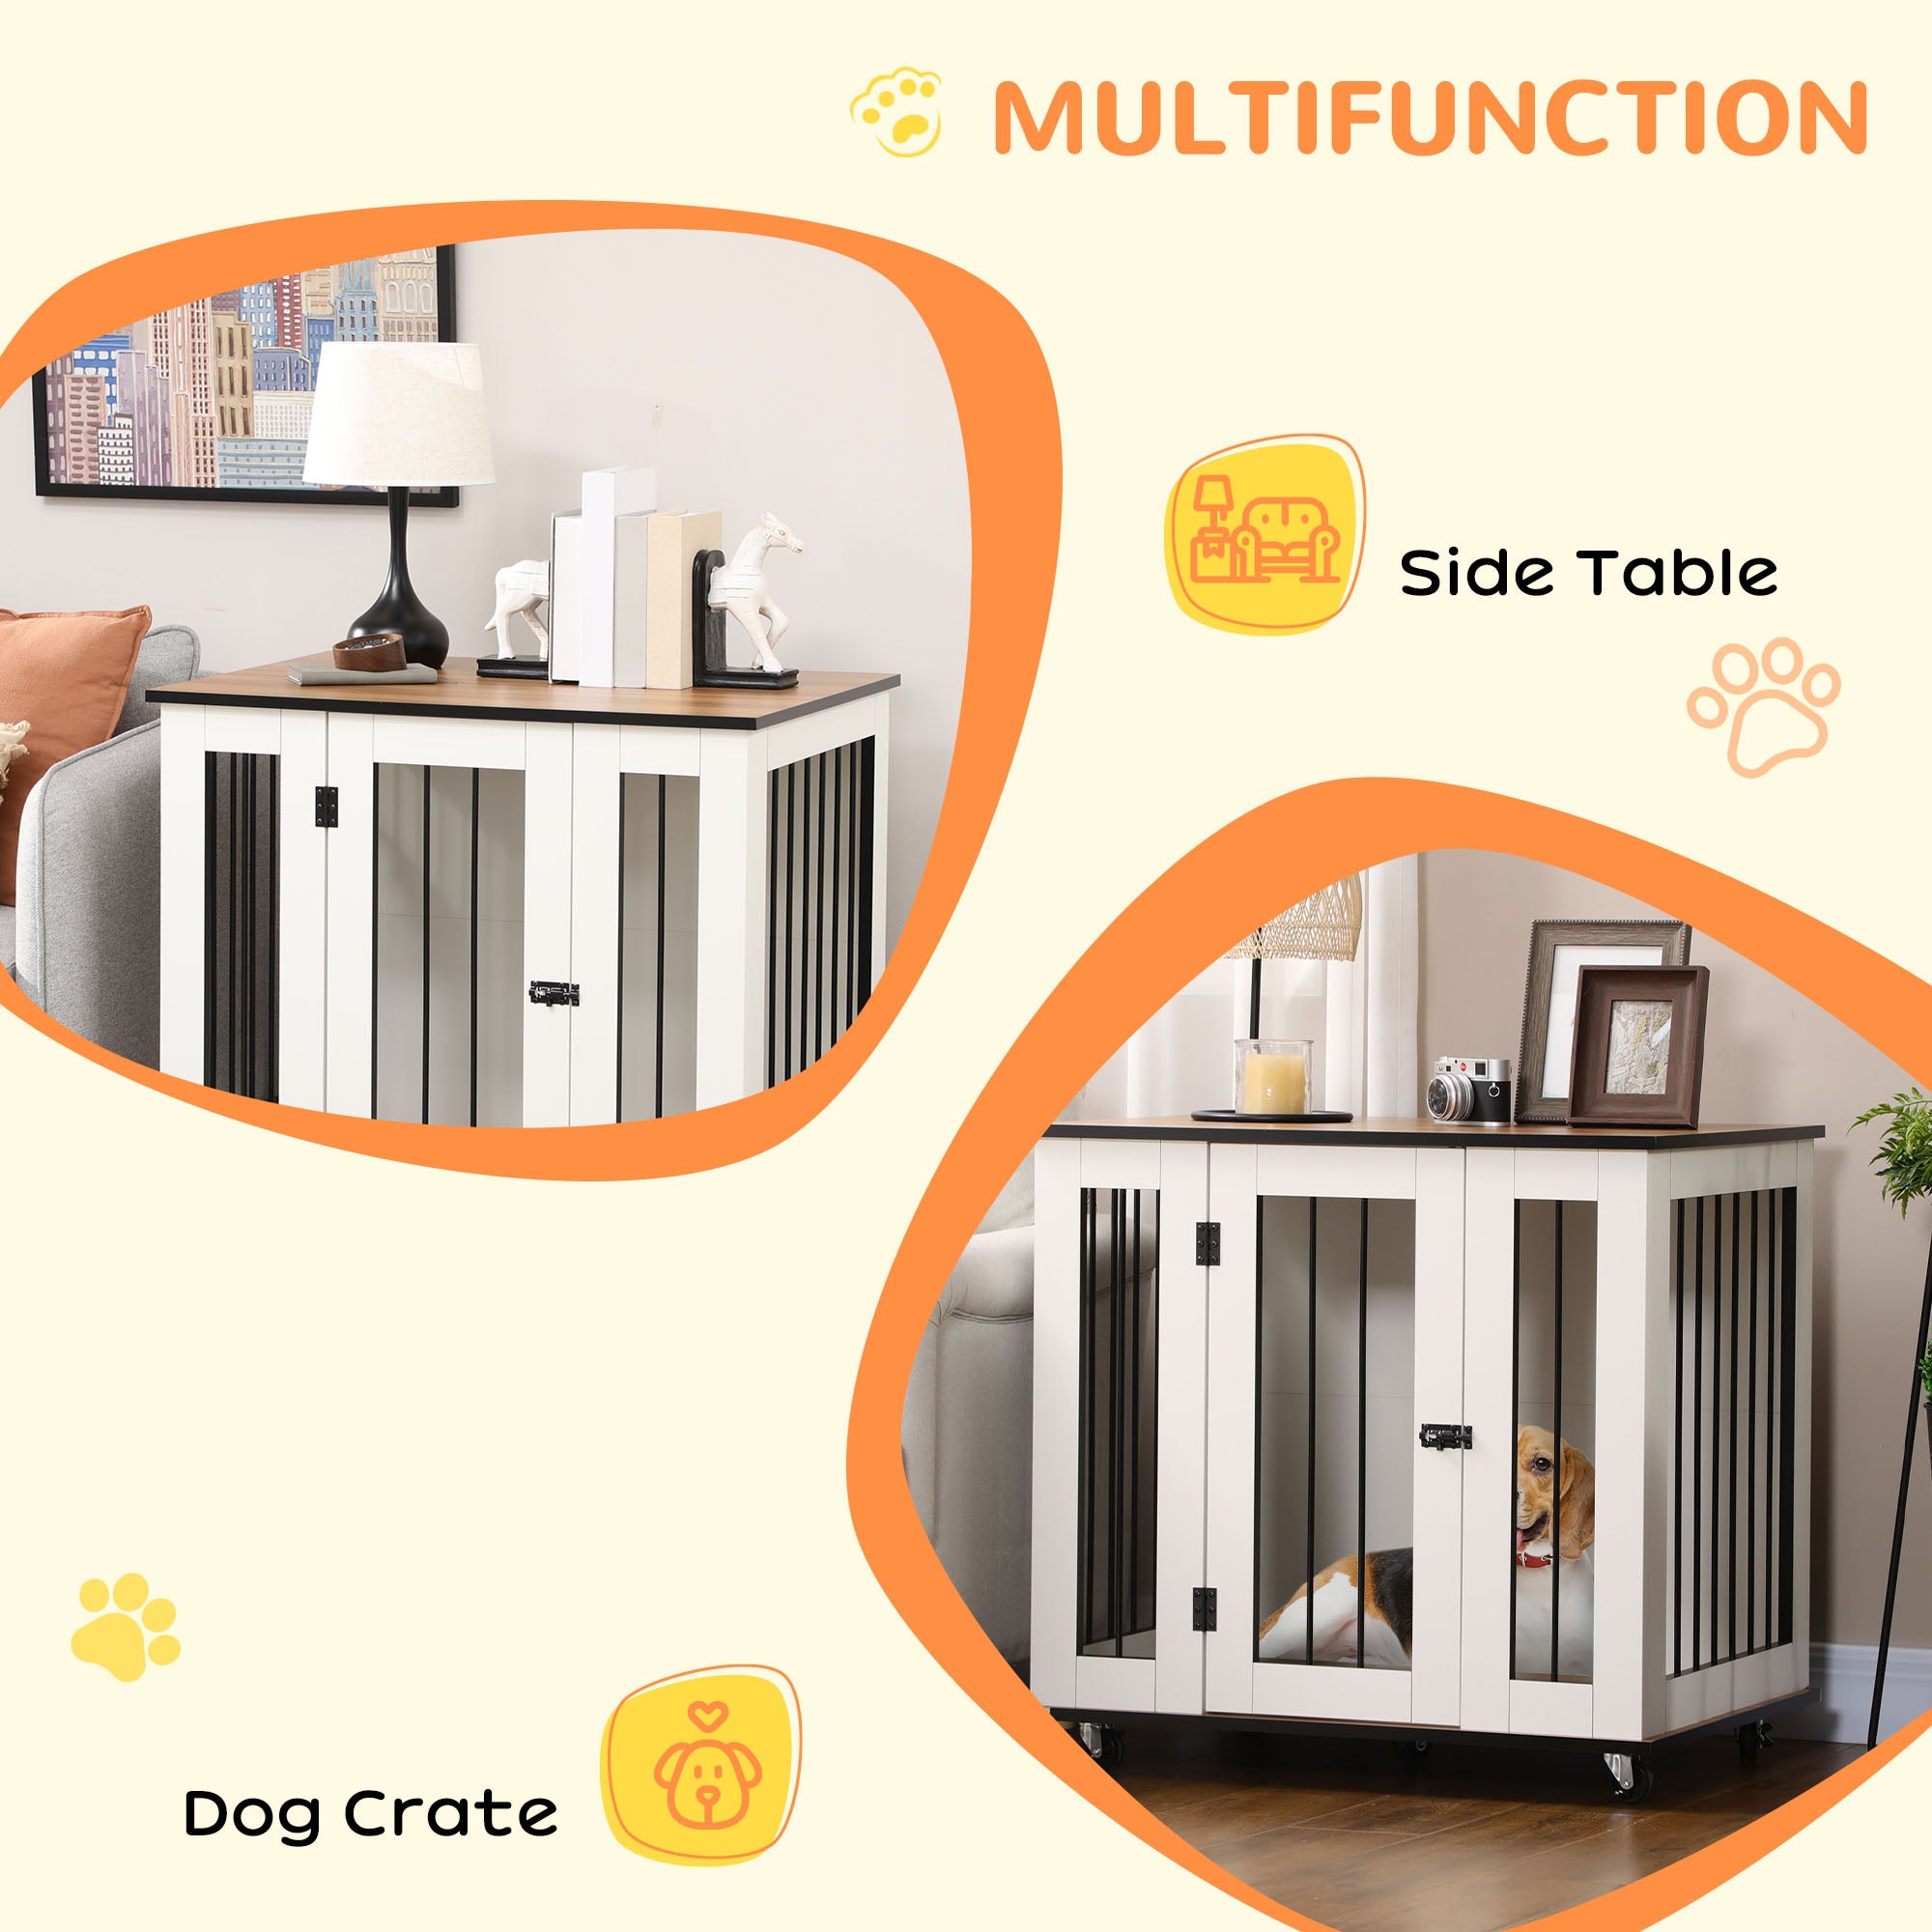 PawHut Dog Crate Furniture with Wheels, Dog Cage End Table for Medium Dogs, with Lockable Door, White, 80 x 60 x 76.5cm